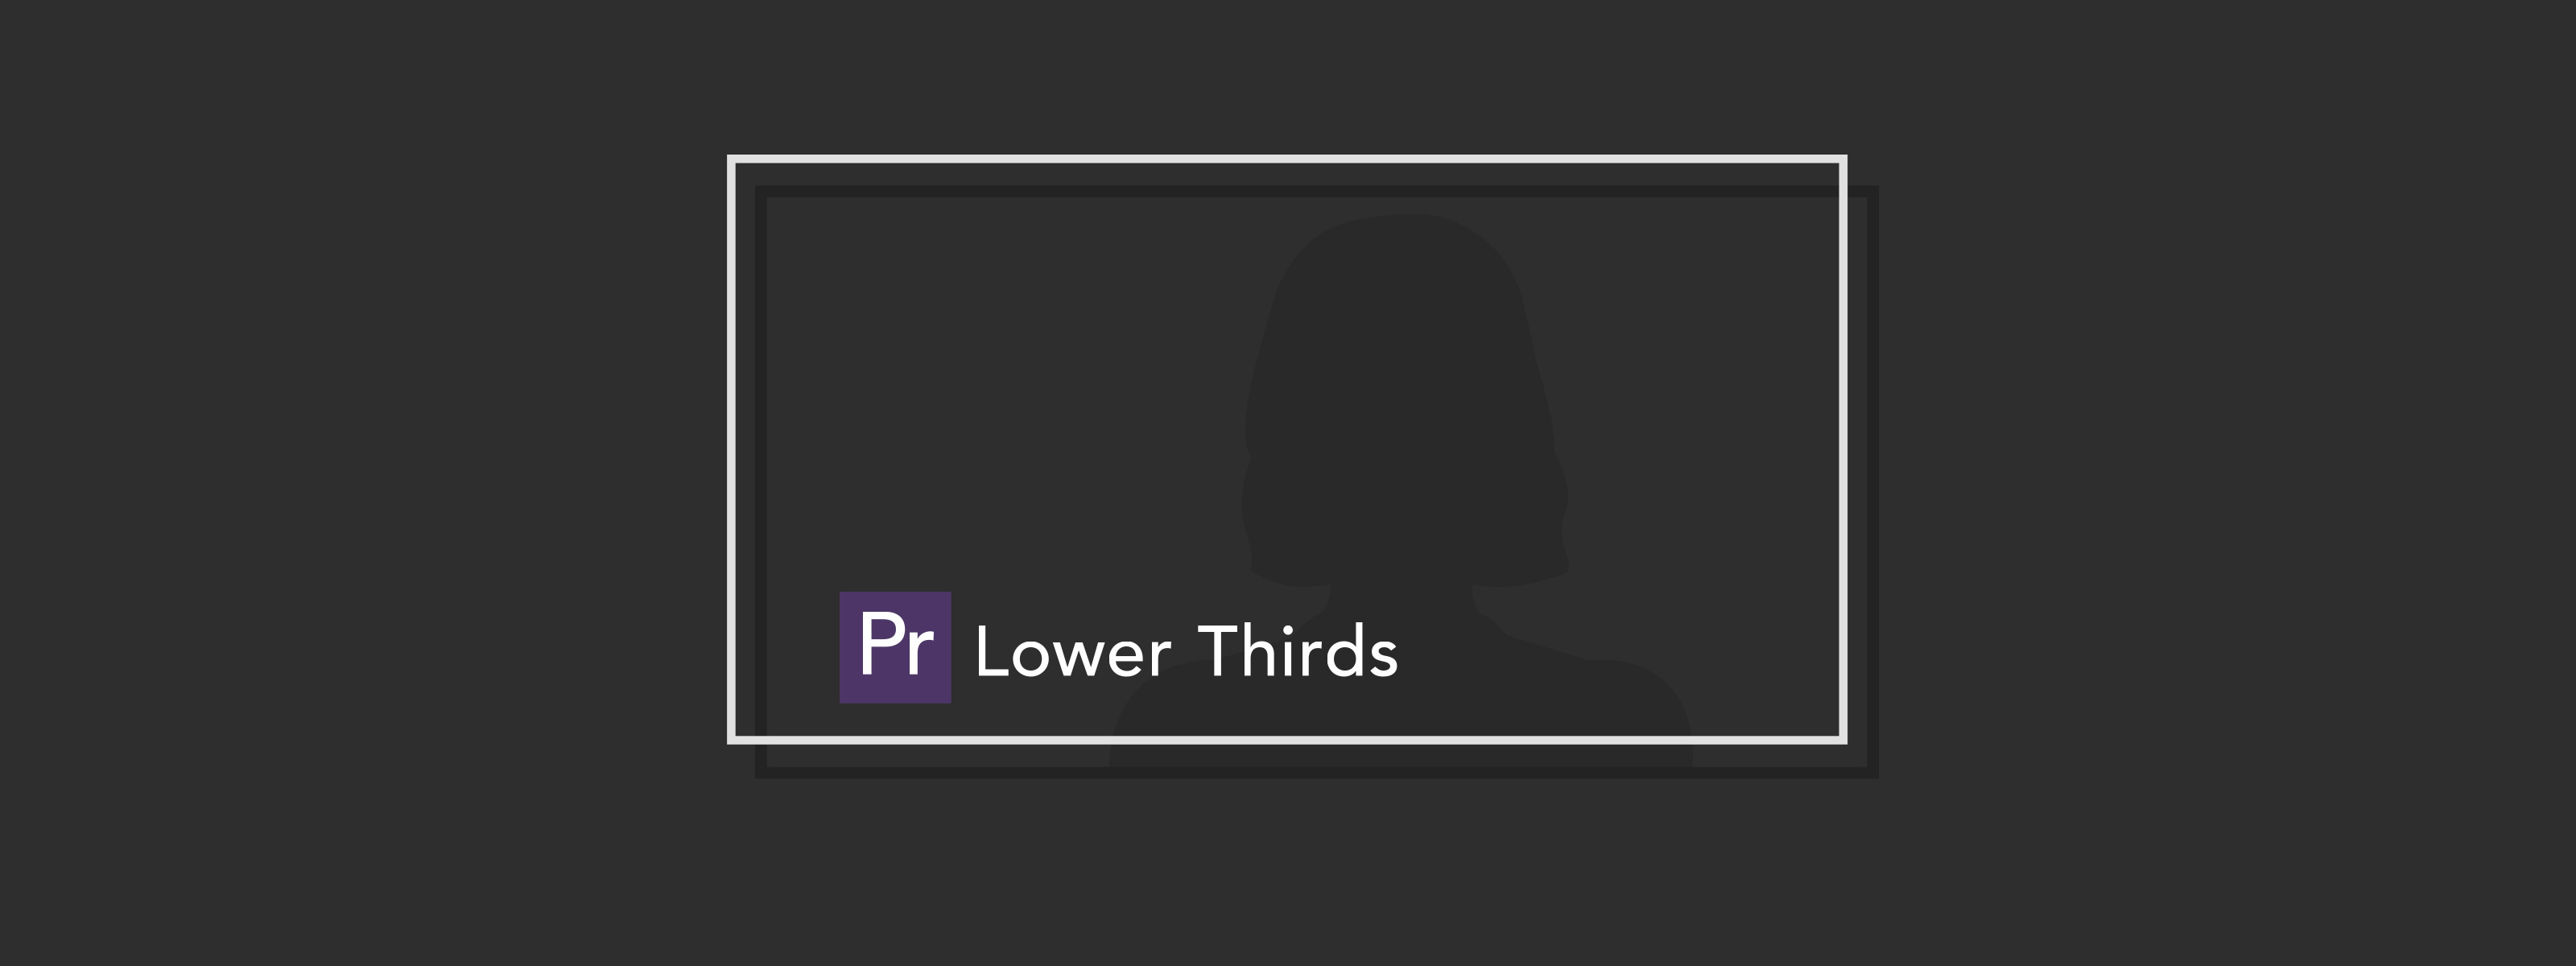 lower third premiere pro template free